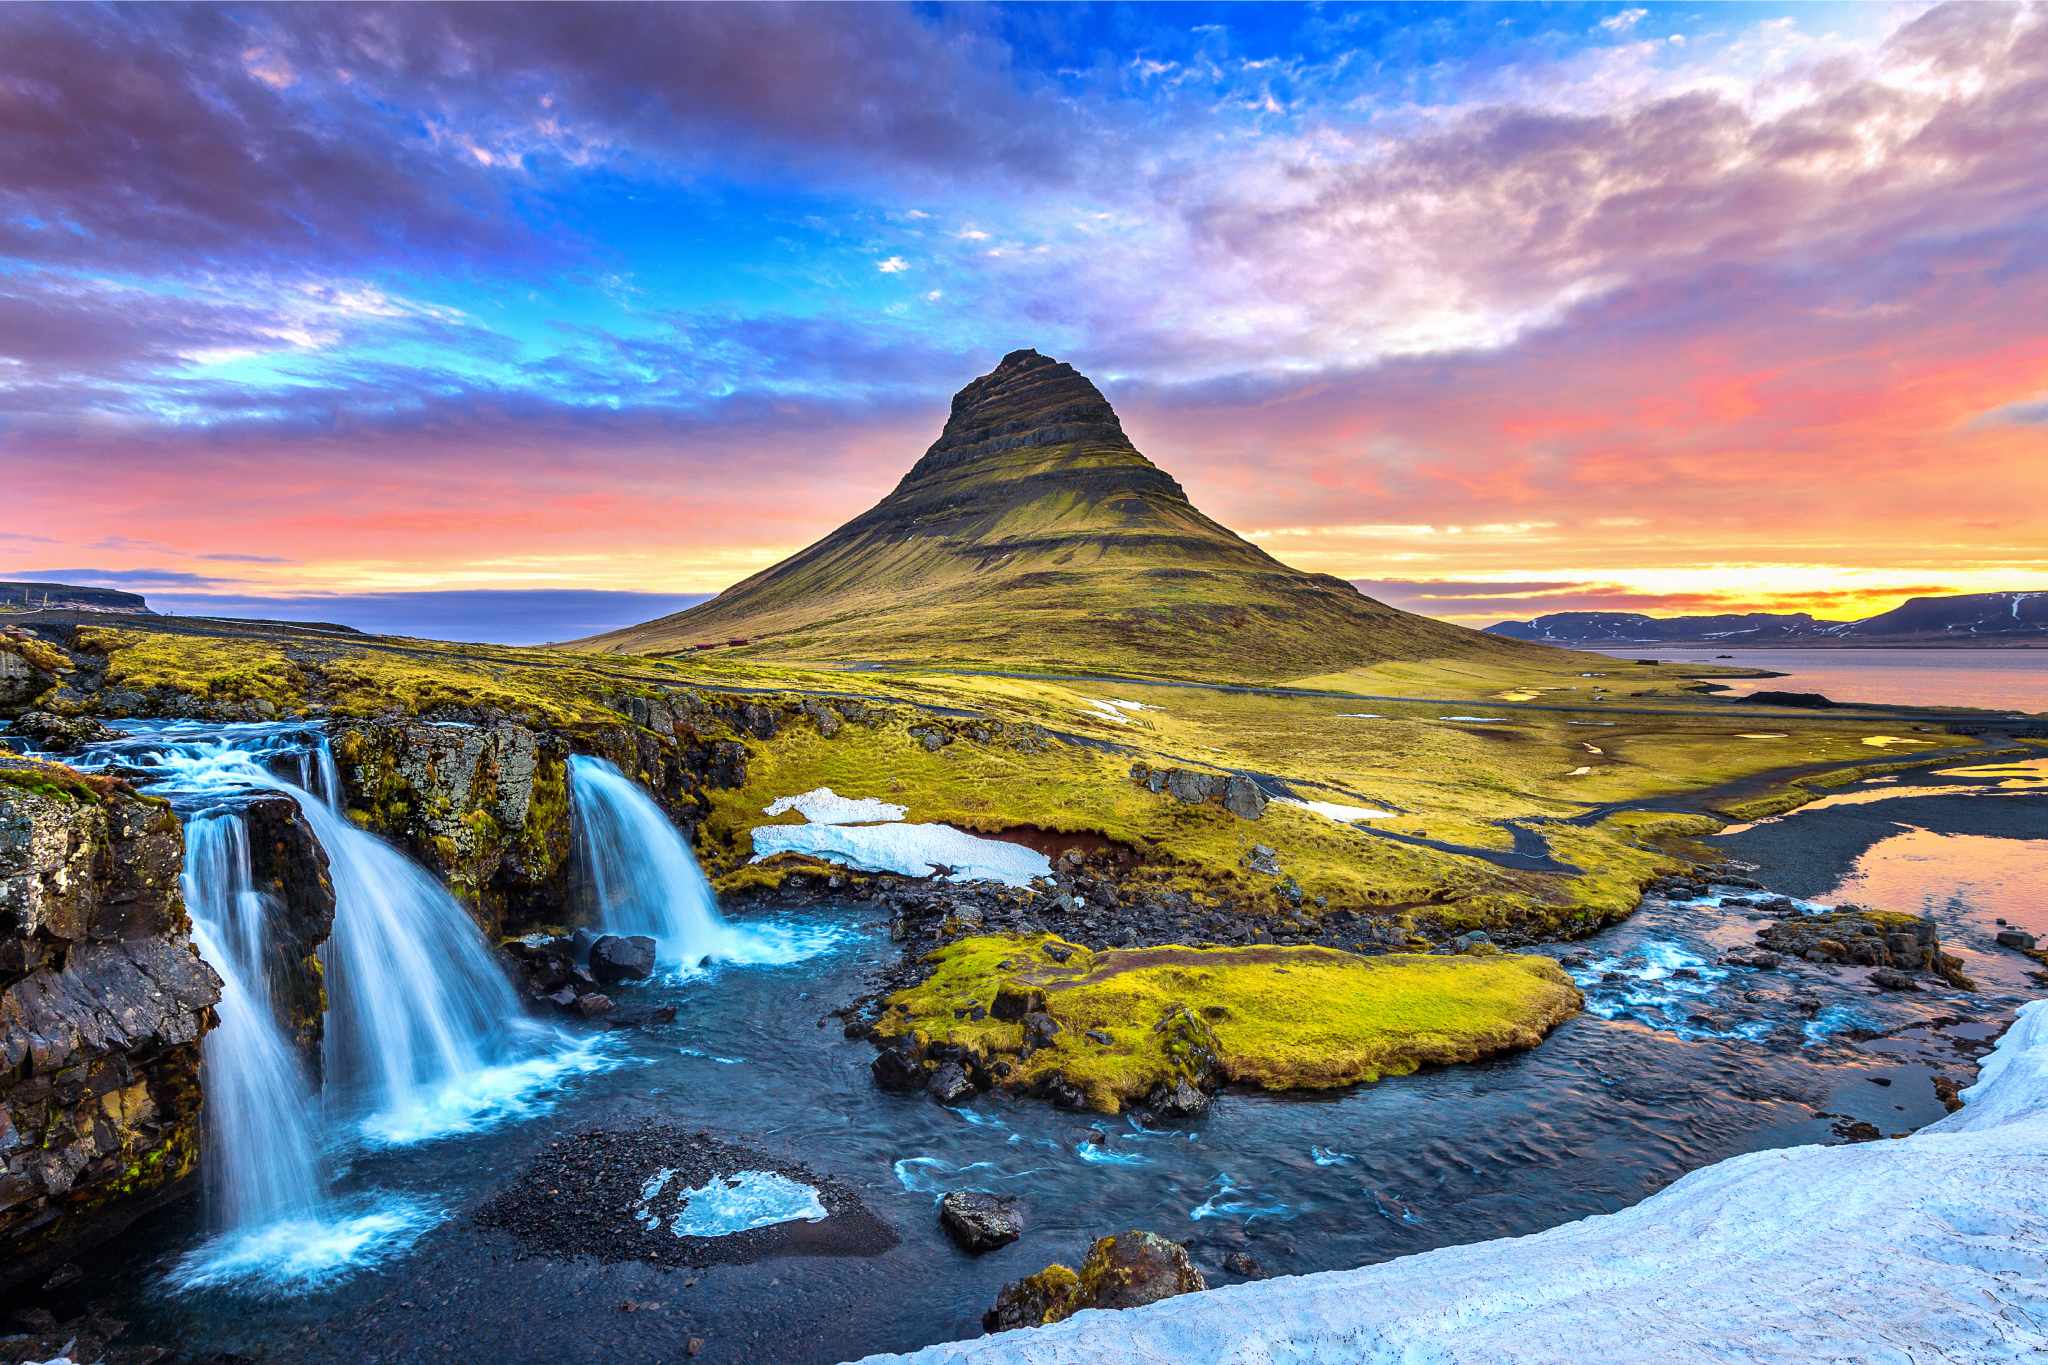 Discover the Magic of Iceland: A 6 Nights & 7 Days Adventure